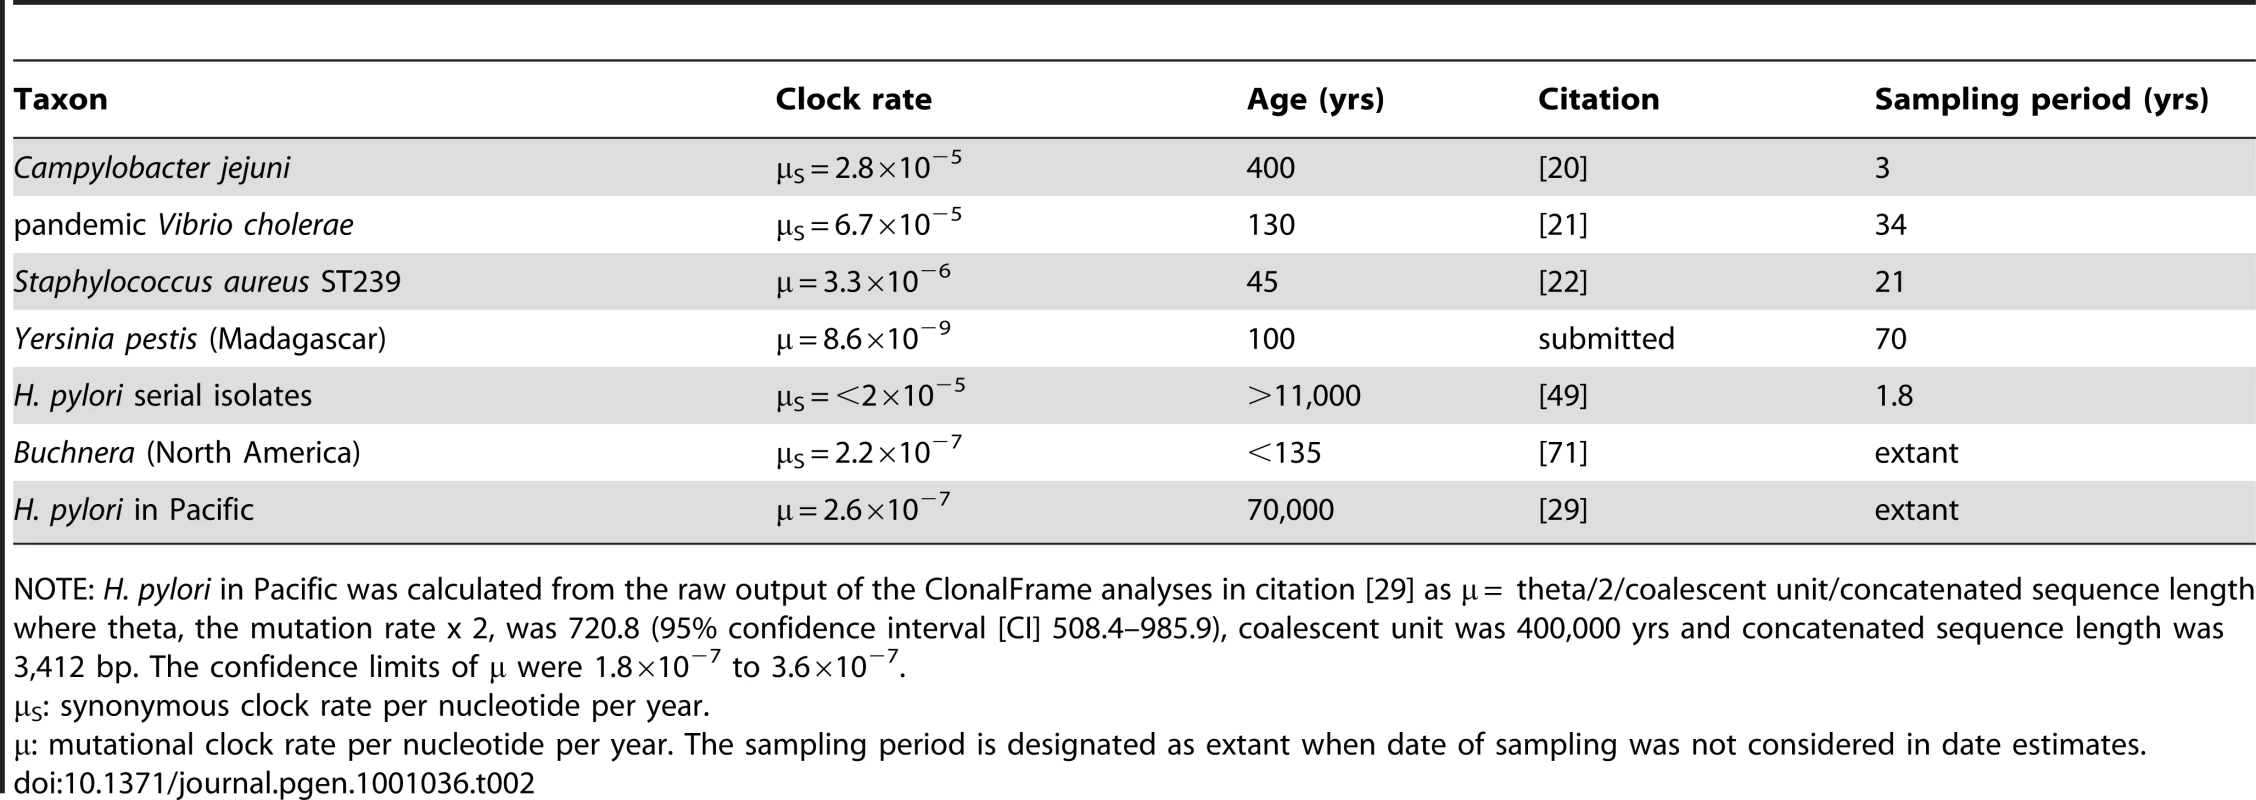 Published ages and clock rates for microevolution in selected bacteria.